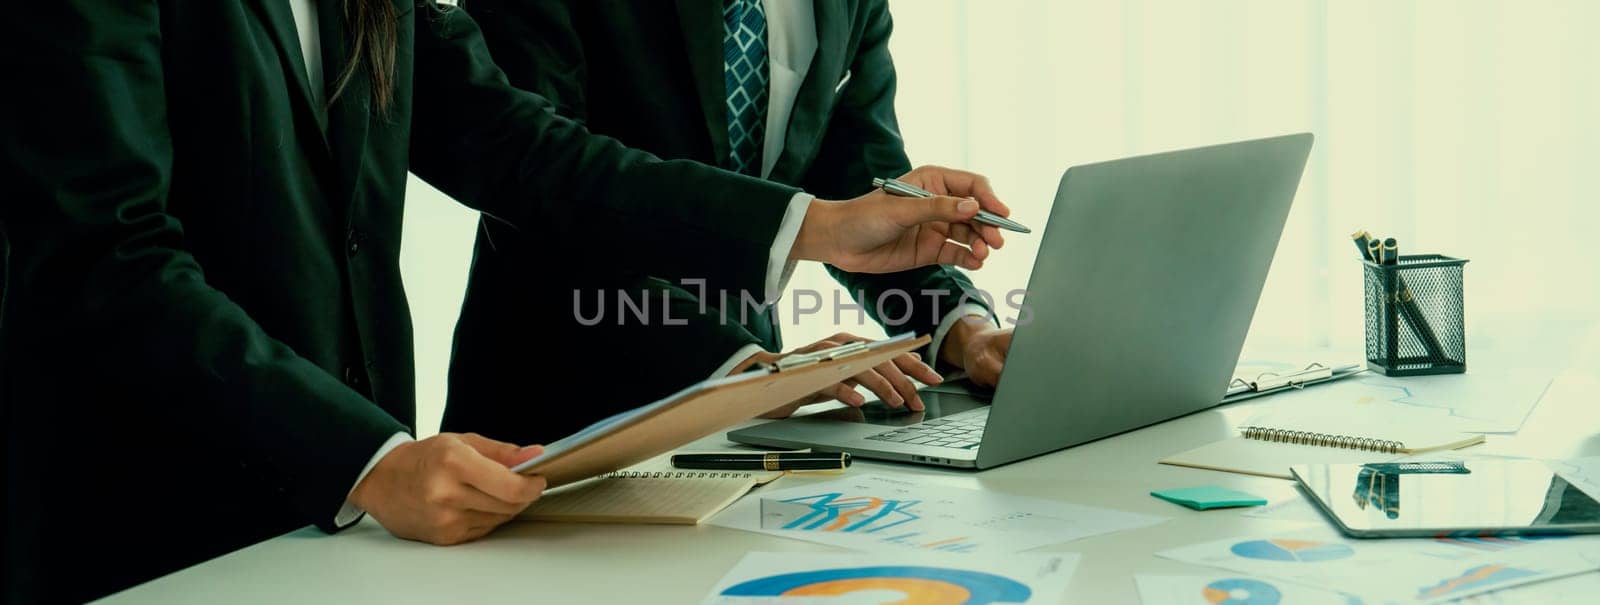 Business people in group meeting in formal attire share idea discussing report for company profit in creative workspace for start up business shot in close up view on group meeting table . Oratory .